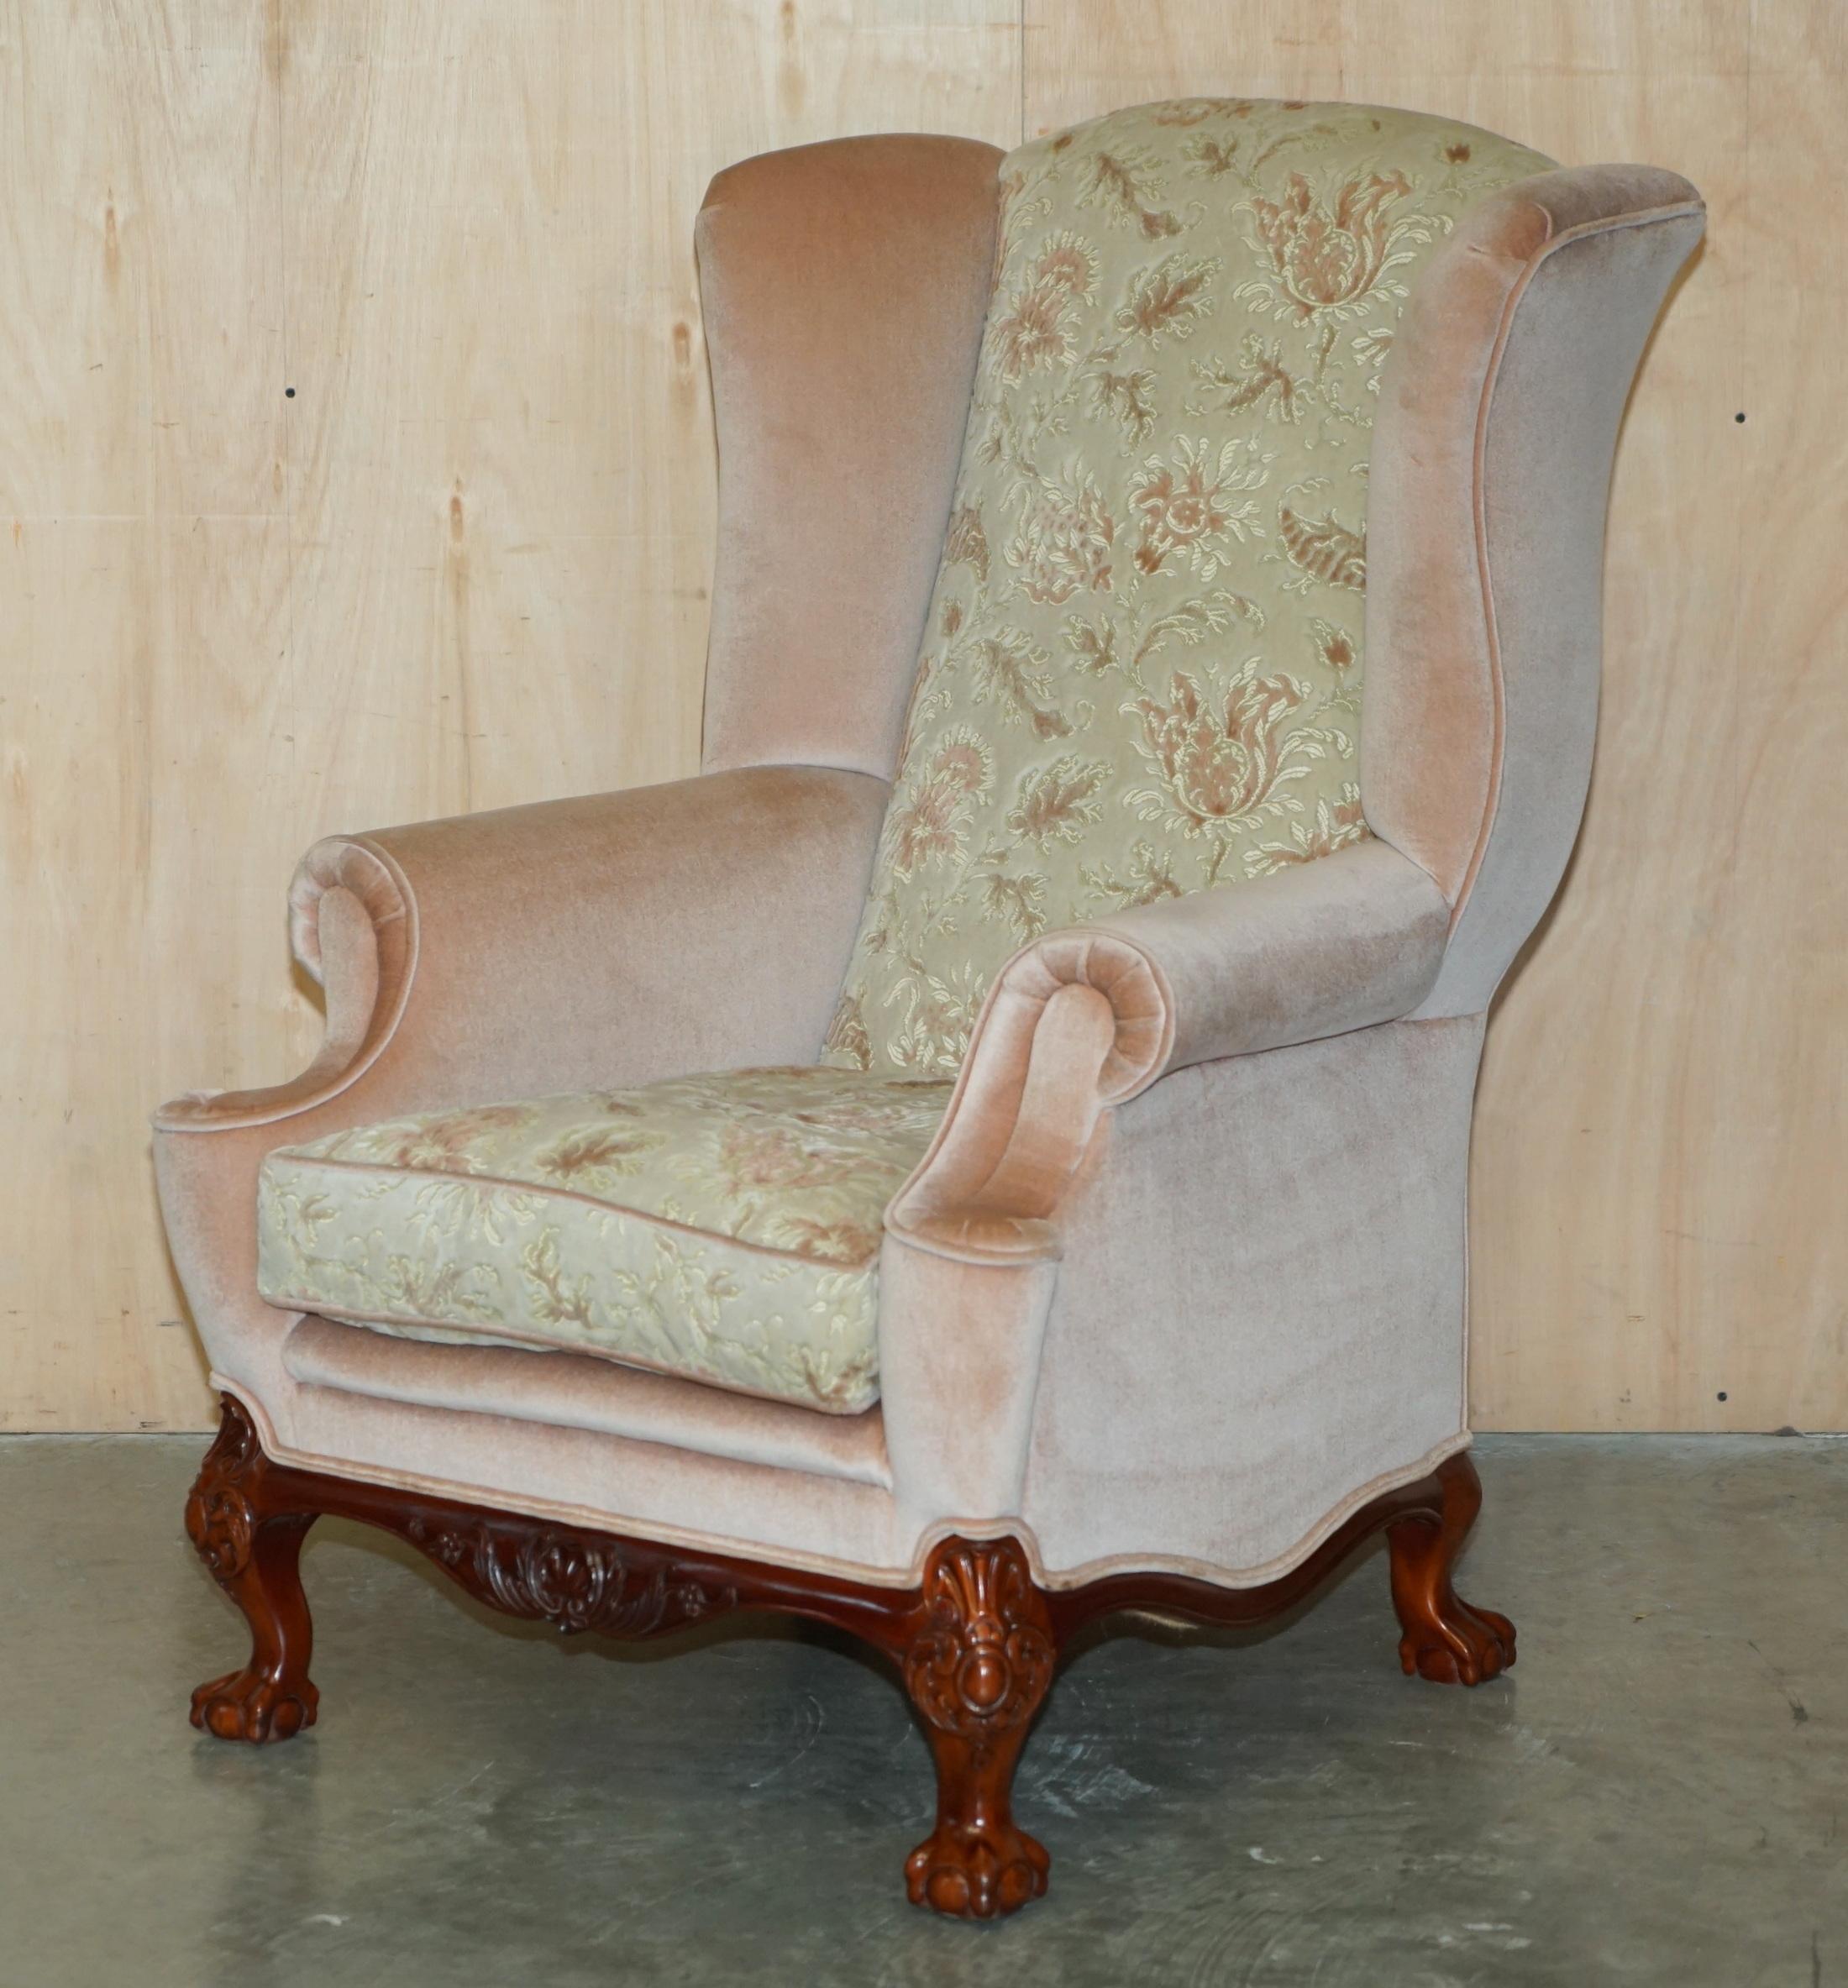 Royal House Antiques is delighted to offer for sale this lovely pair of Salmon pink and Floral upholstered Wingback armchairs with ornately carved Claw & Ball feet to the front and back 

This pair of armchairs are super decorative and very well